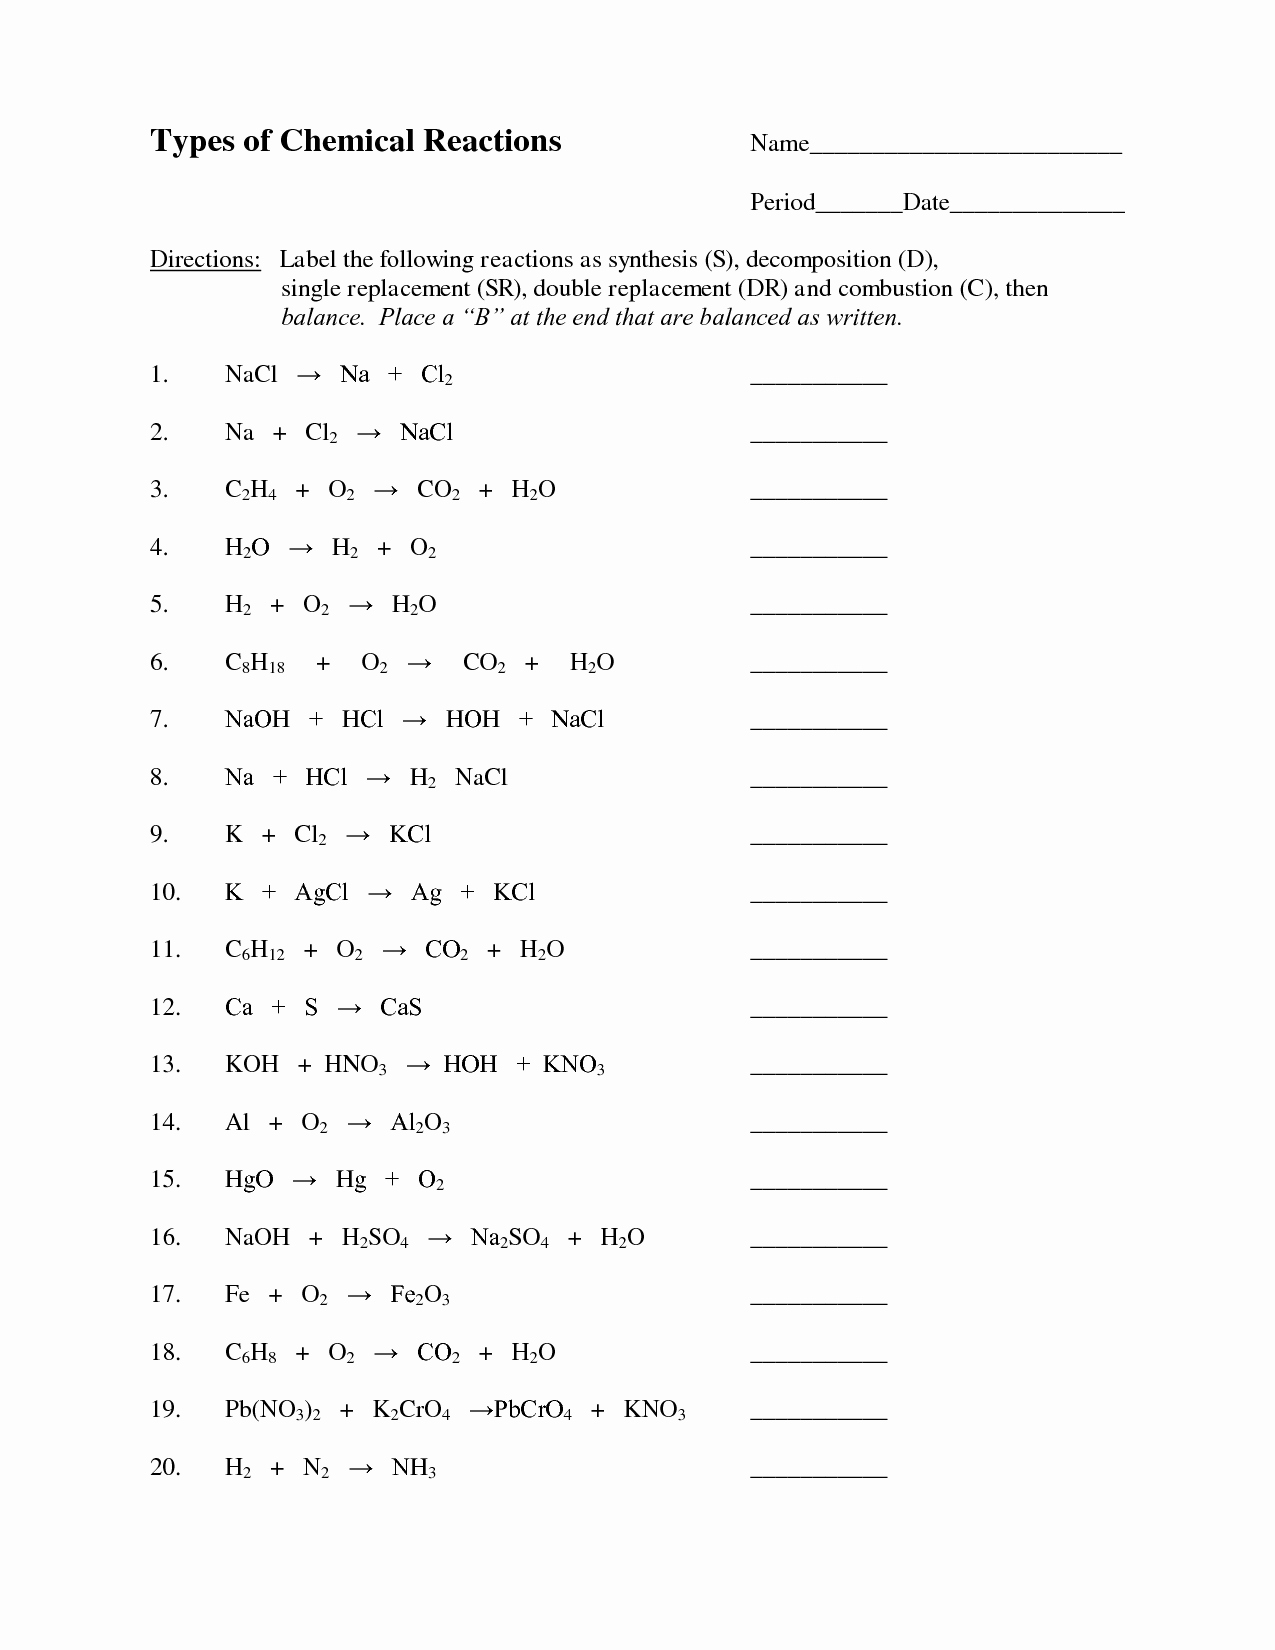 50 Chemical Reactions Types Worksheet | Chessmuseum Template Library